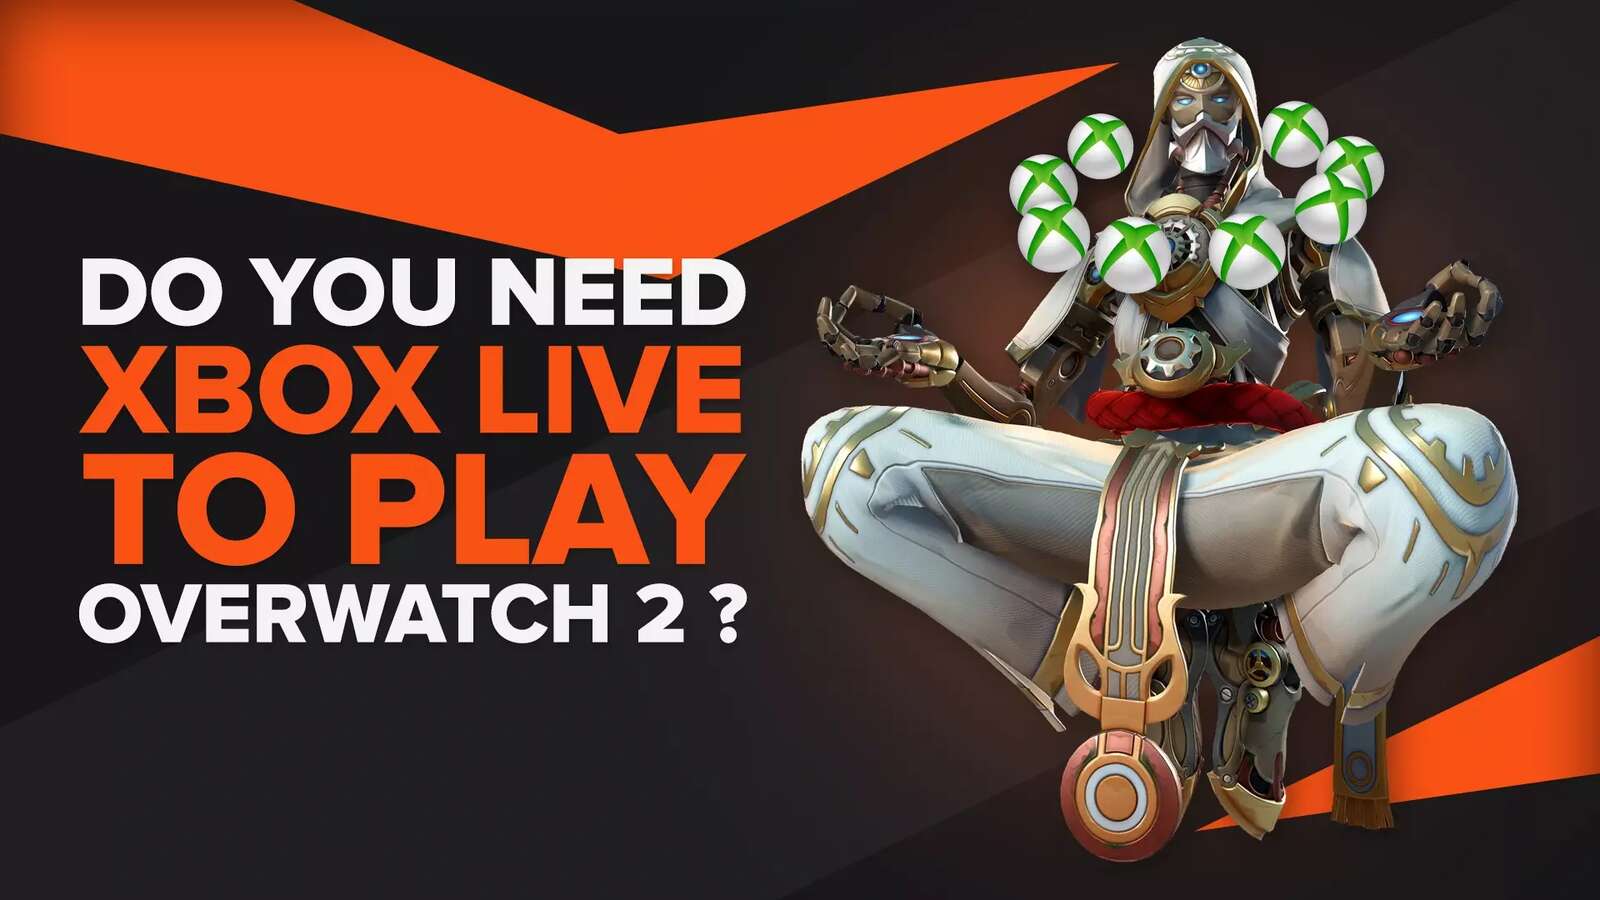 Do You Need Xbox Live to Play Overwatch 2?